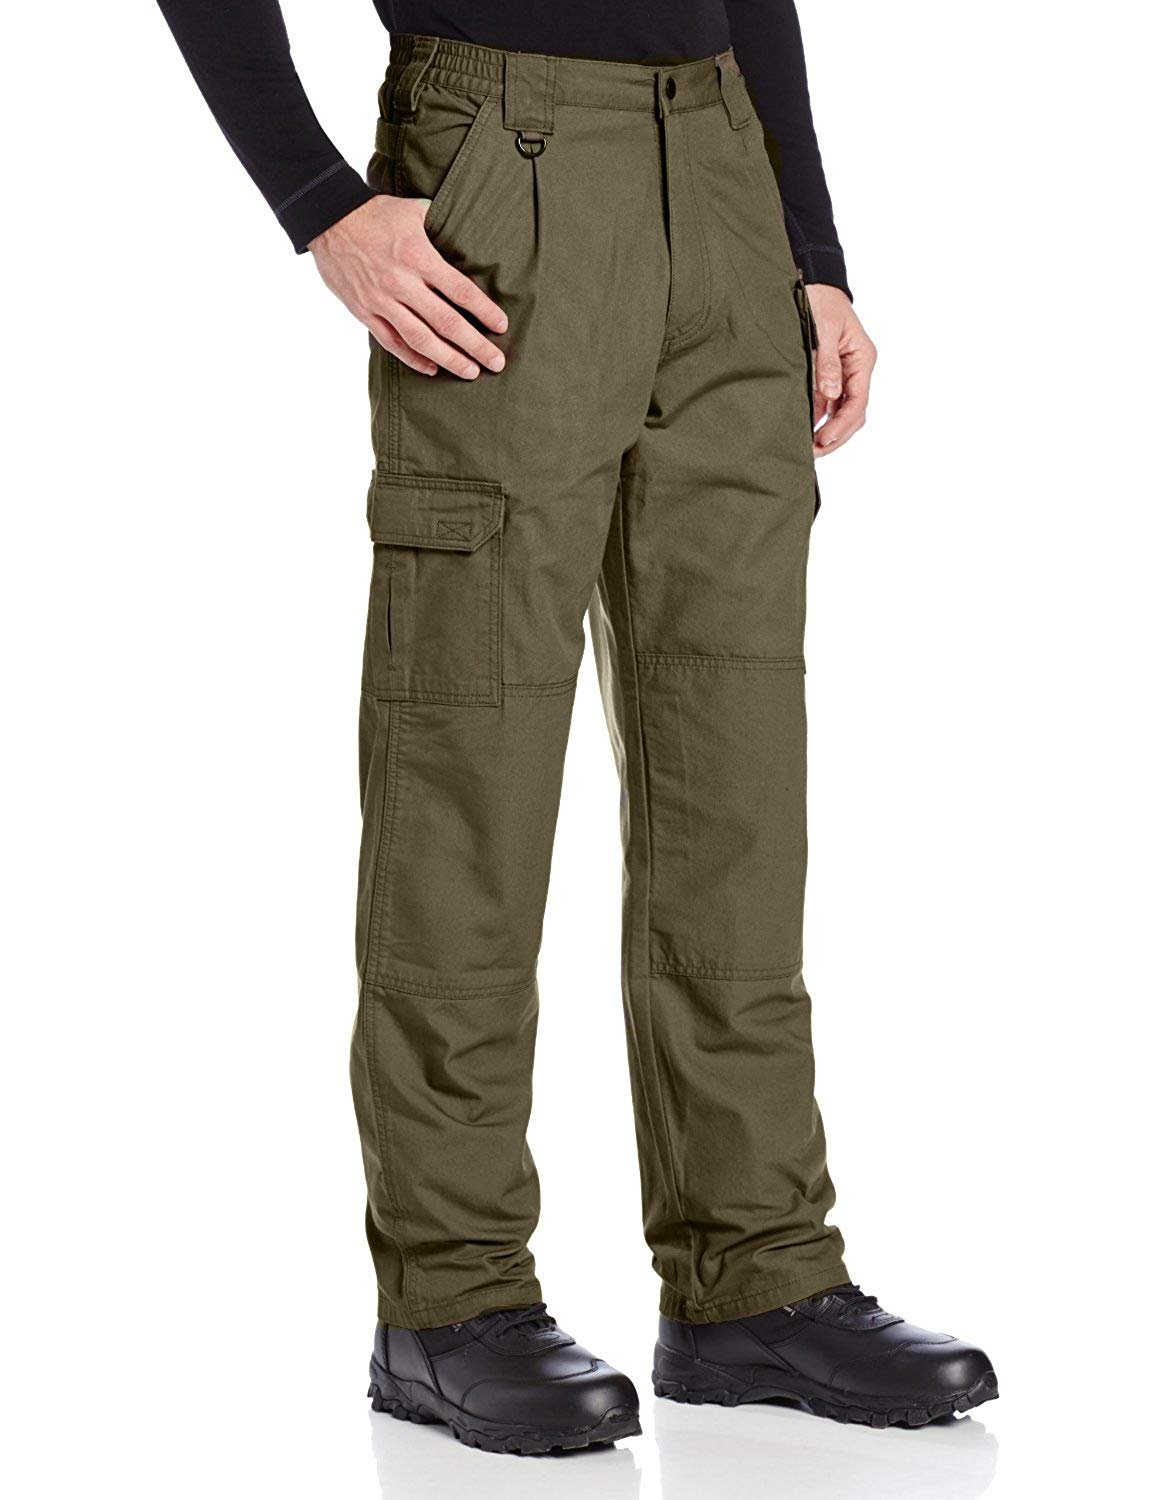 Style 74251 100% Cotton Superior Fit Double Reinforced 5.11 Tactical Mens Active Work Pants 